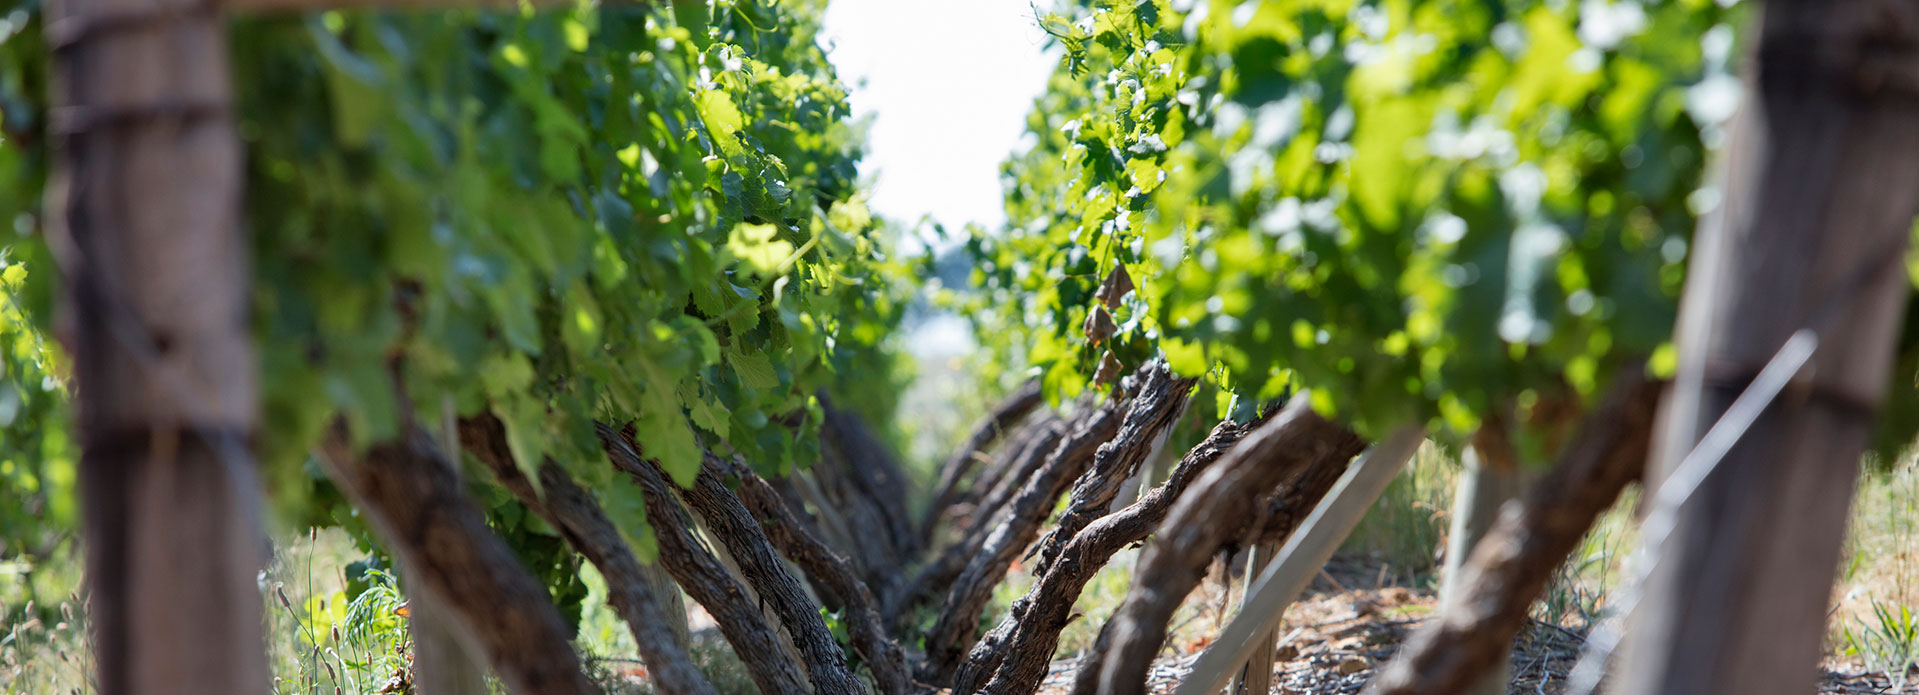 Vines trained to the Lyre System at Backsberg in Paarl, South Africa. A sustainably farmed and carbon neutral winery.